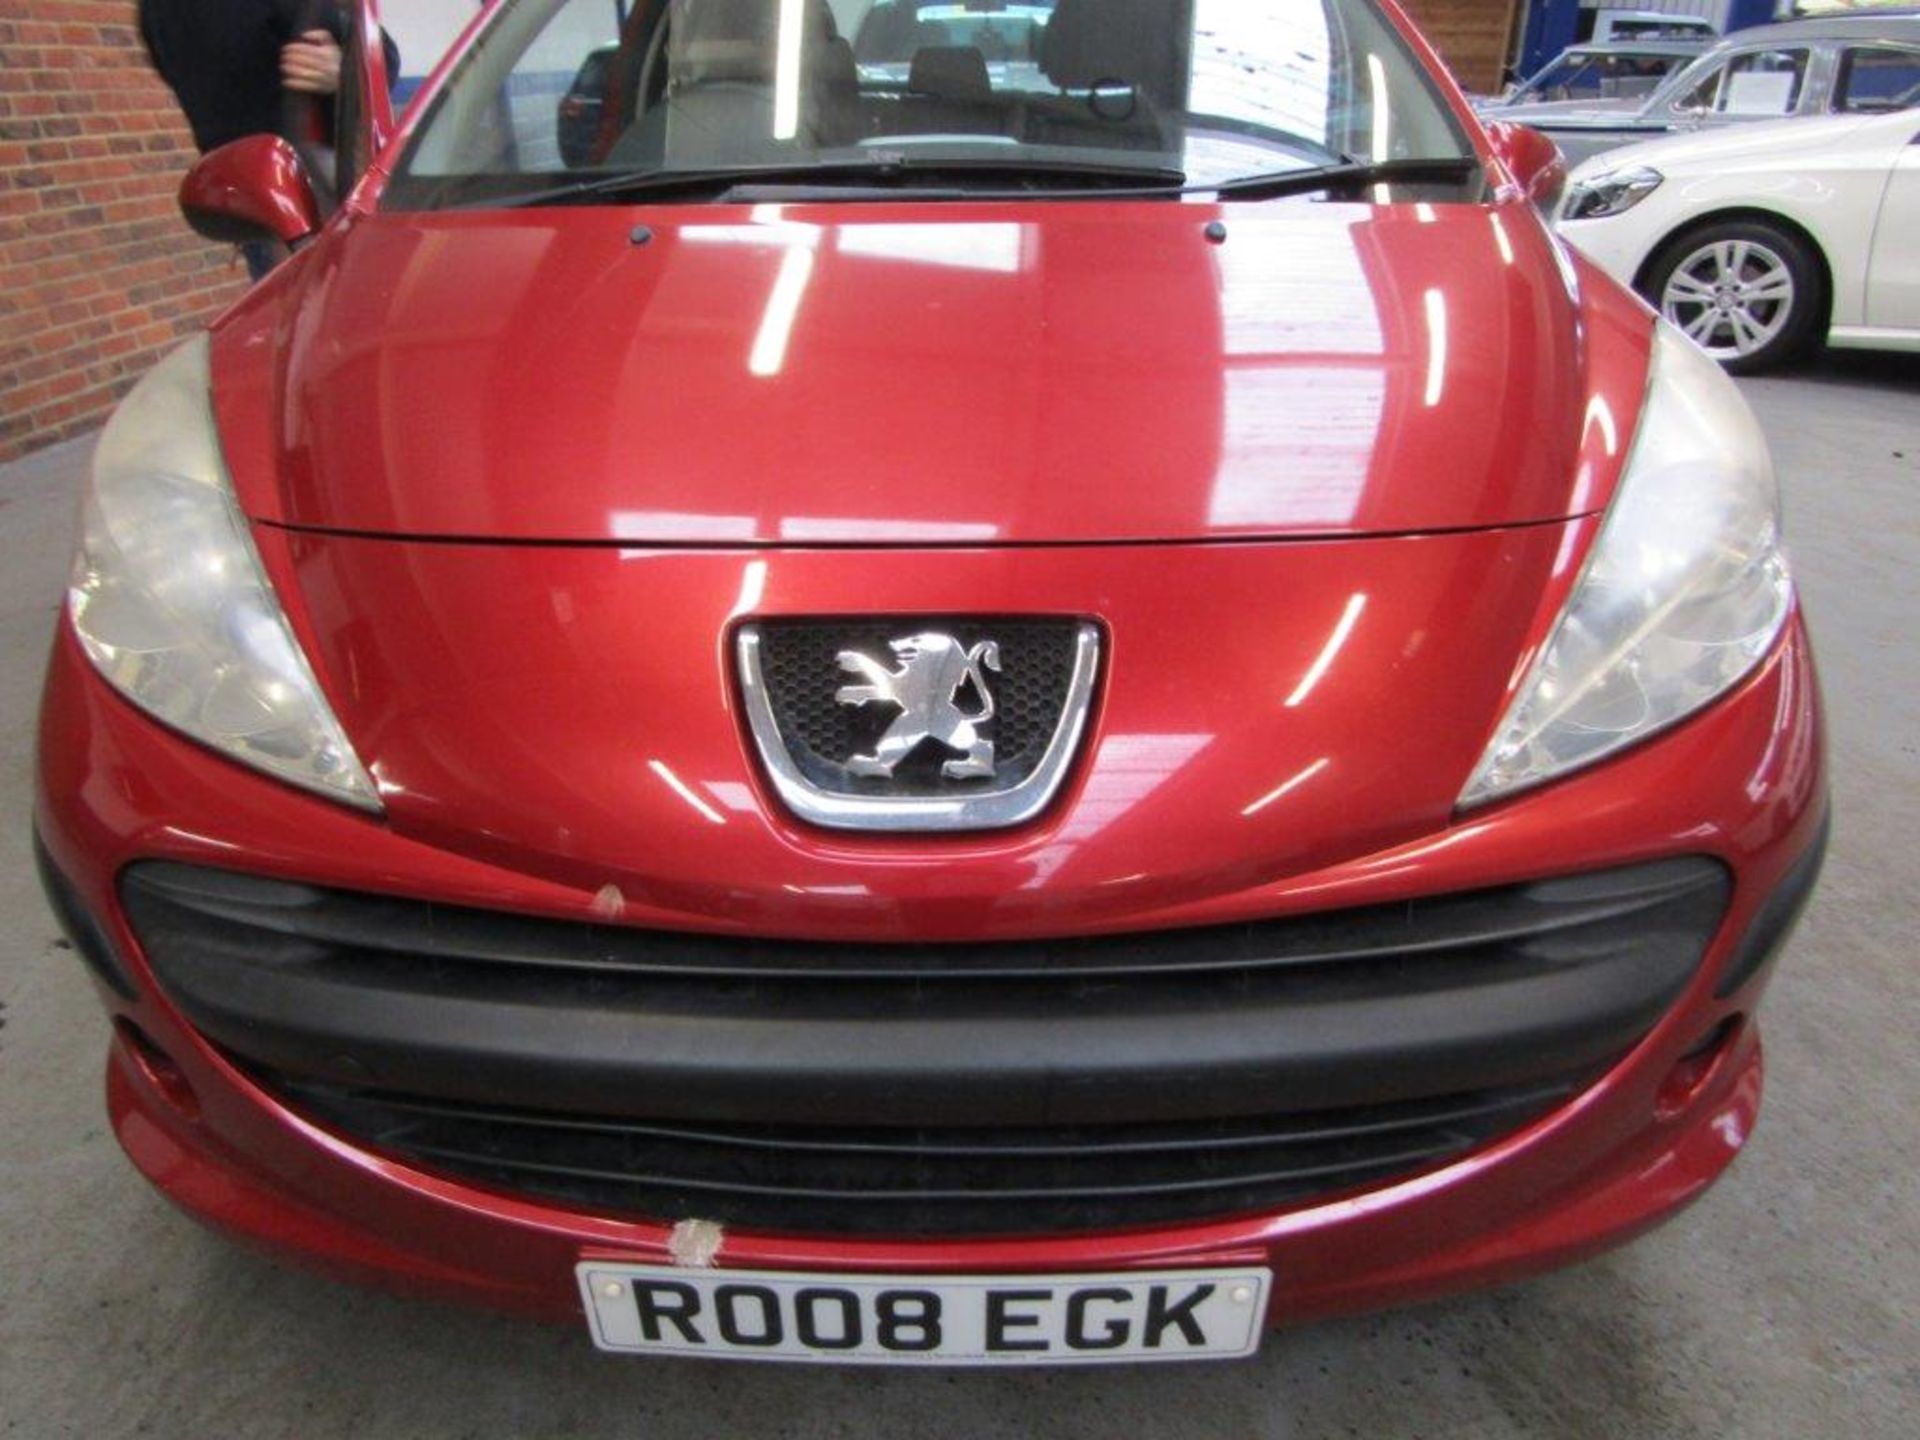 08 08 Peugeot 207 S - Image 3 of 24